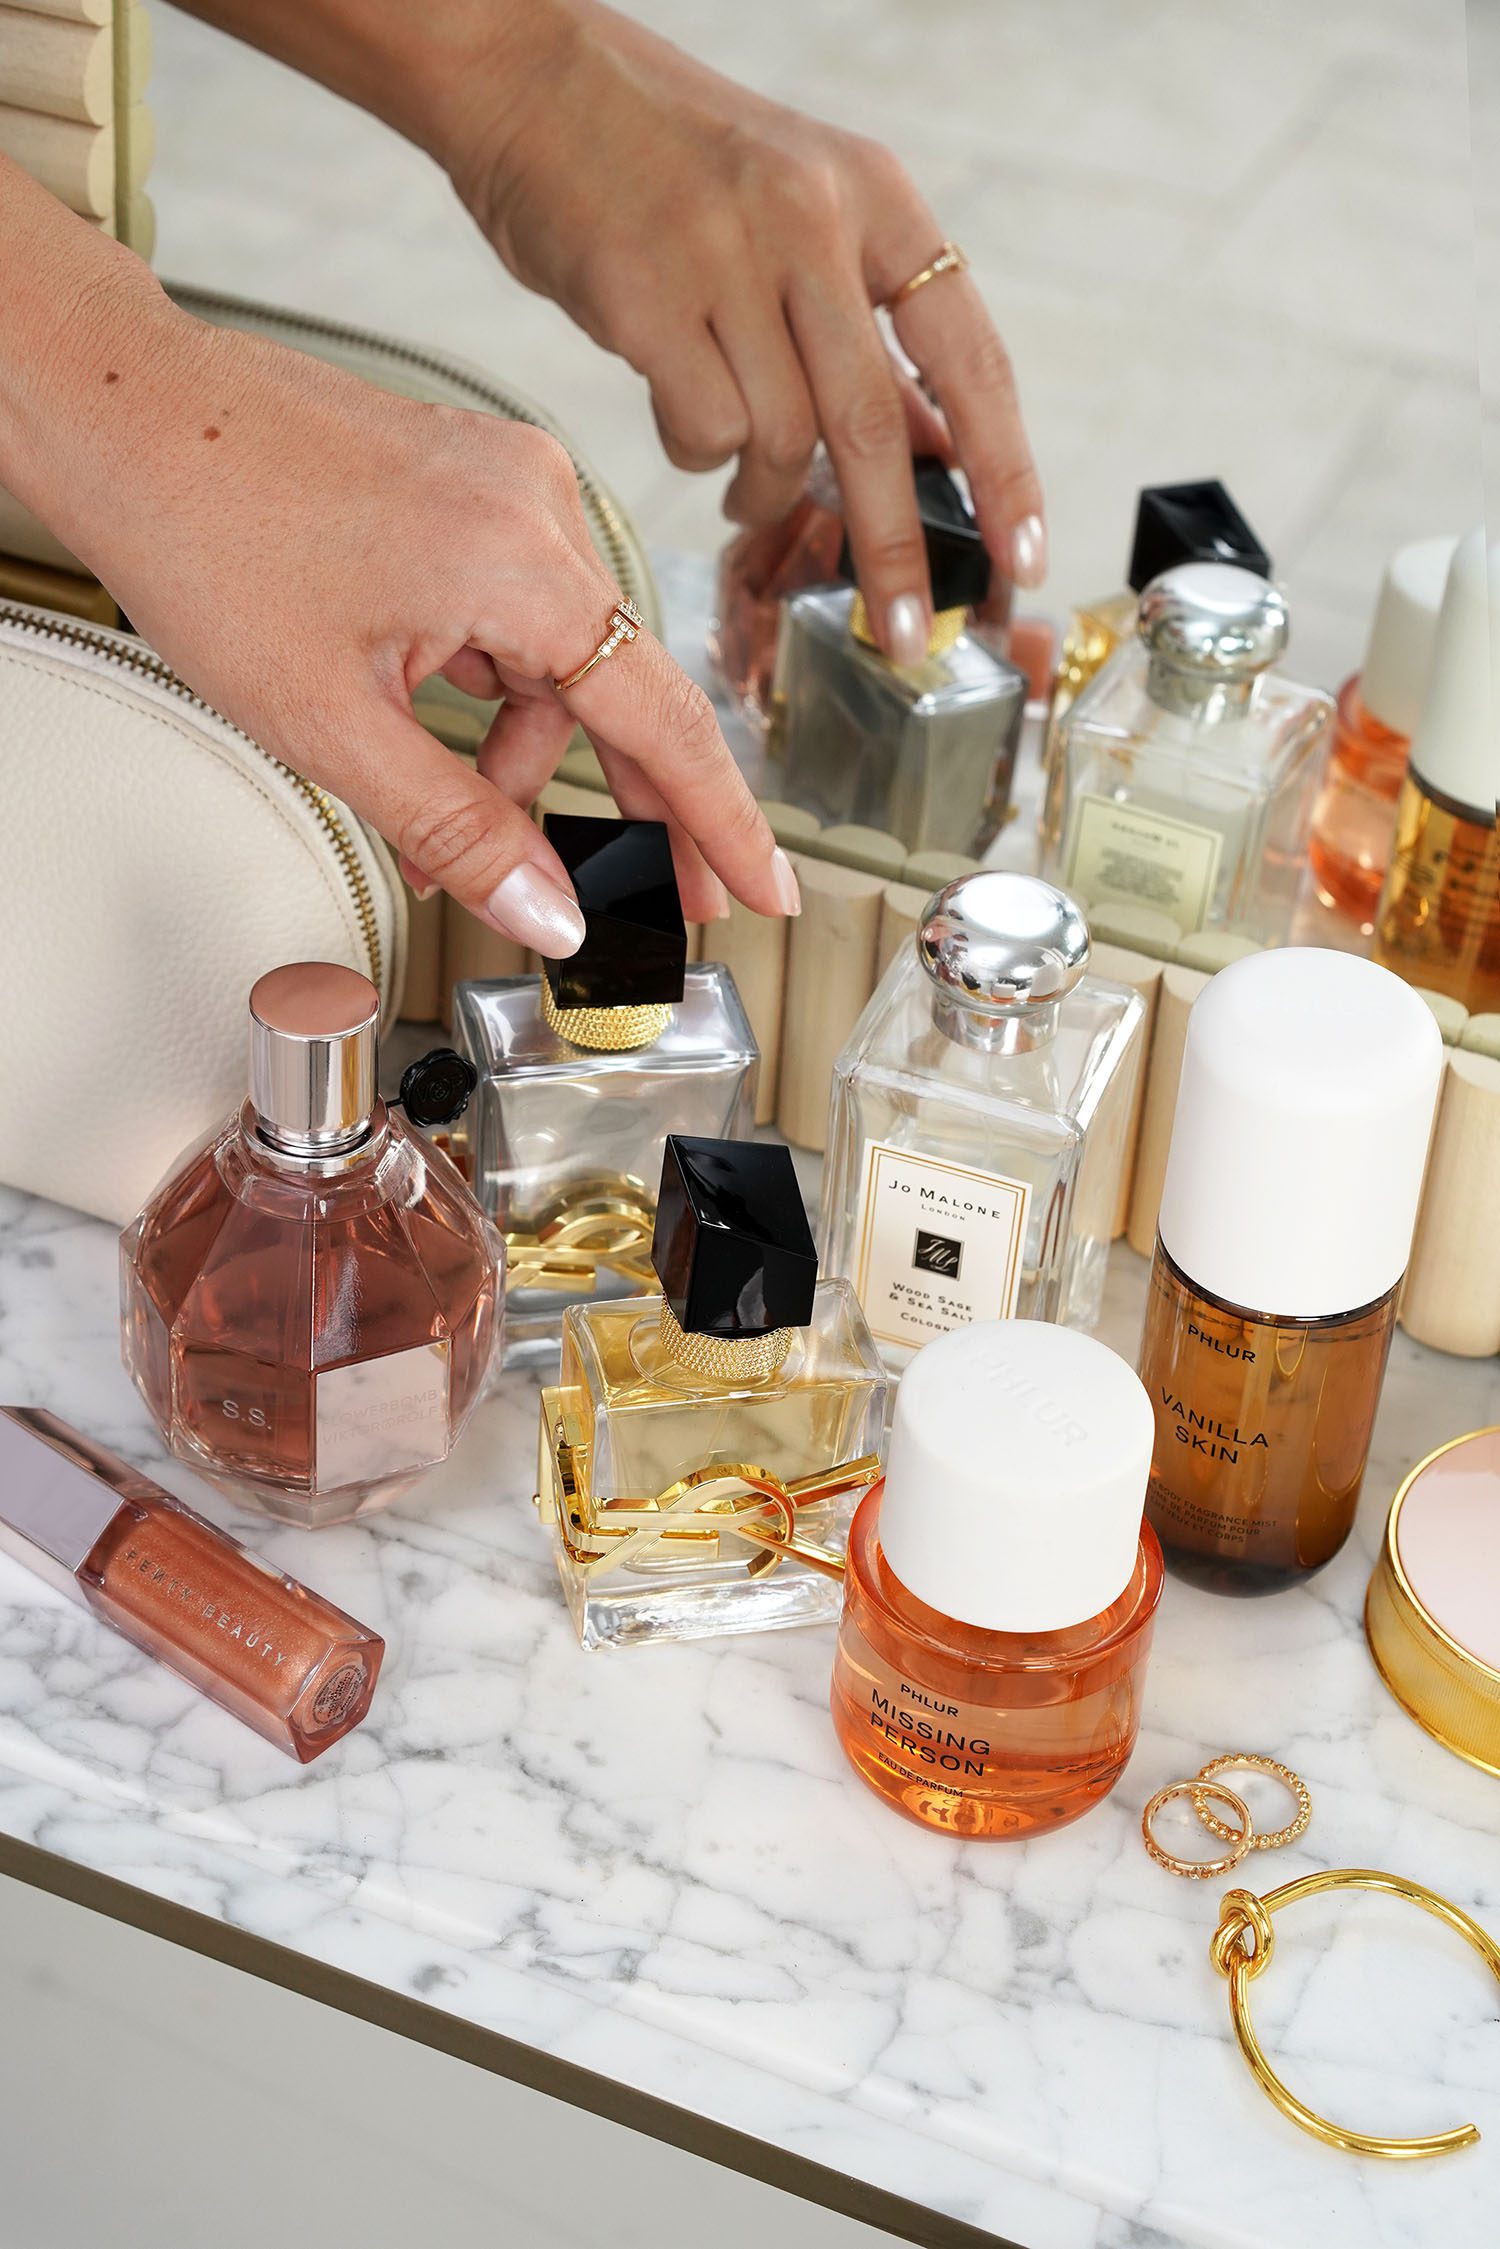 Sephora Fragrance for All Event 2023: Best Scents to Shop